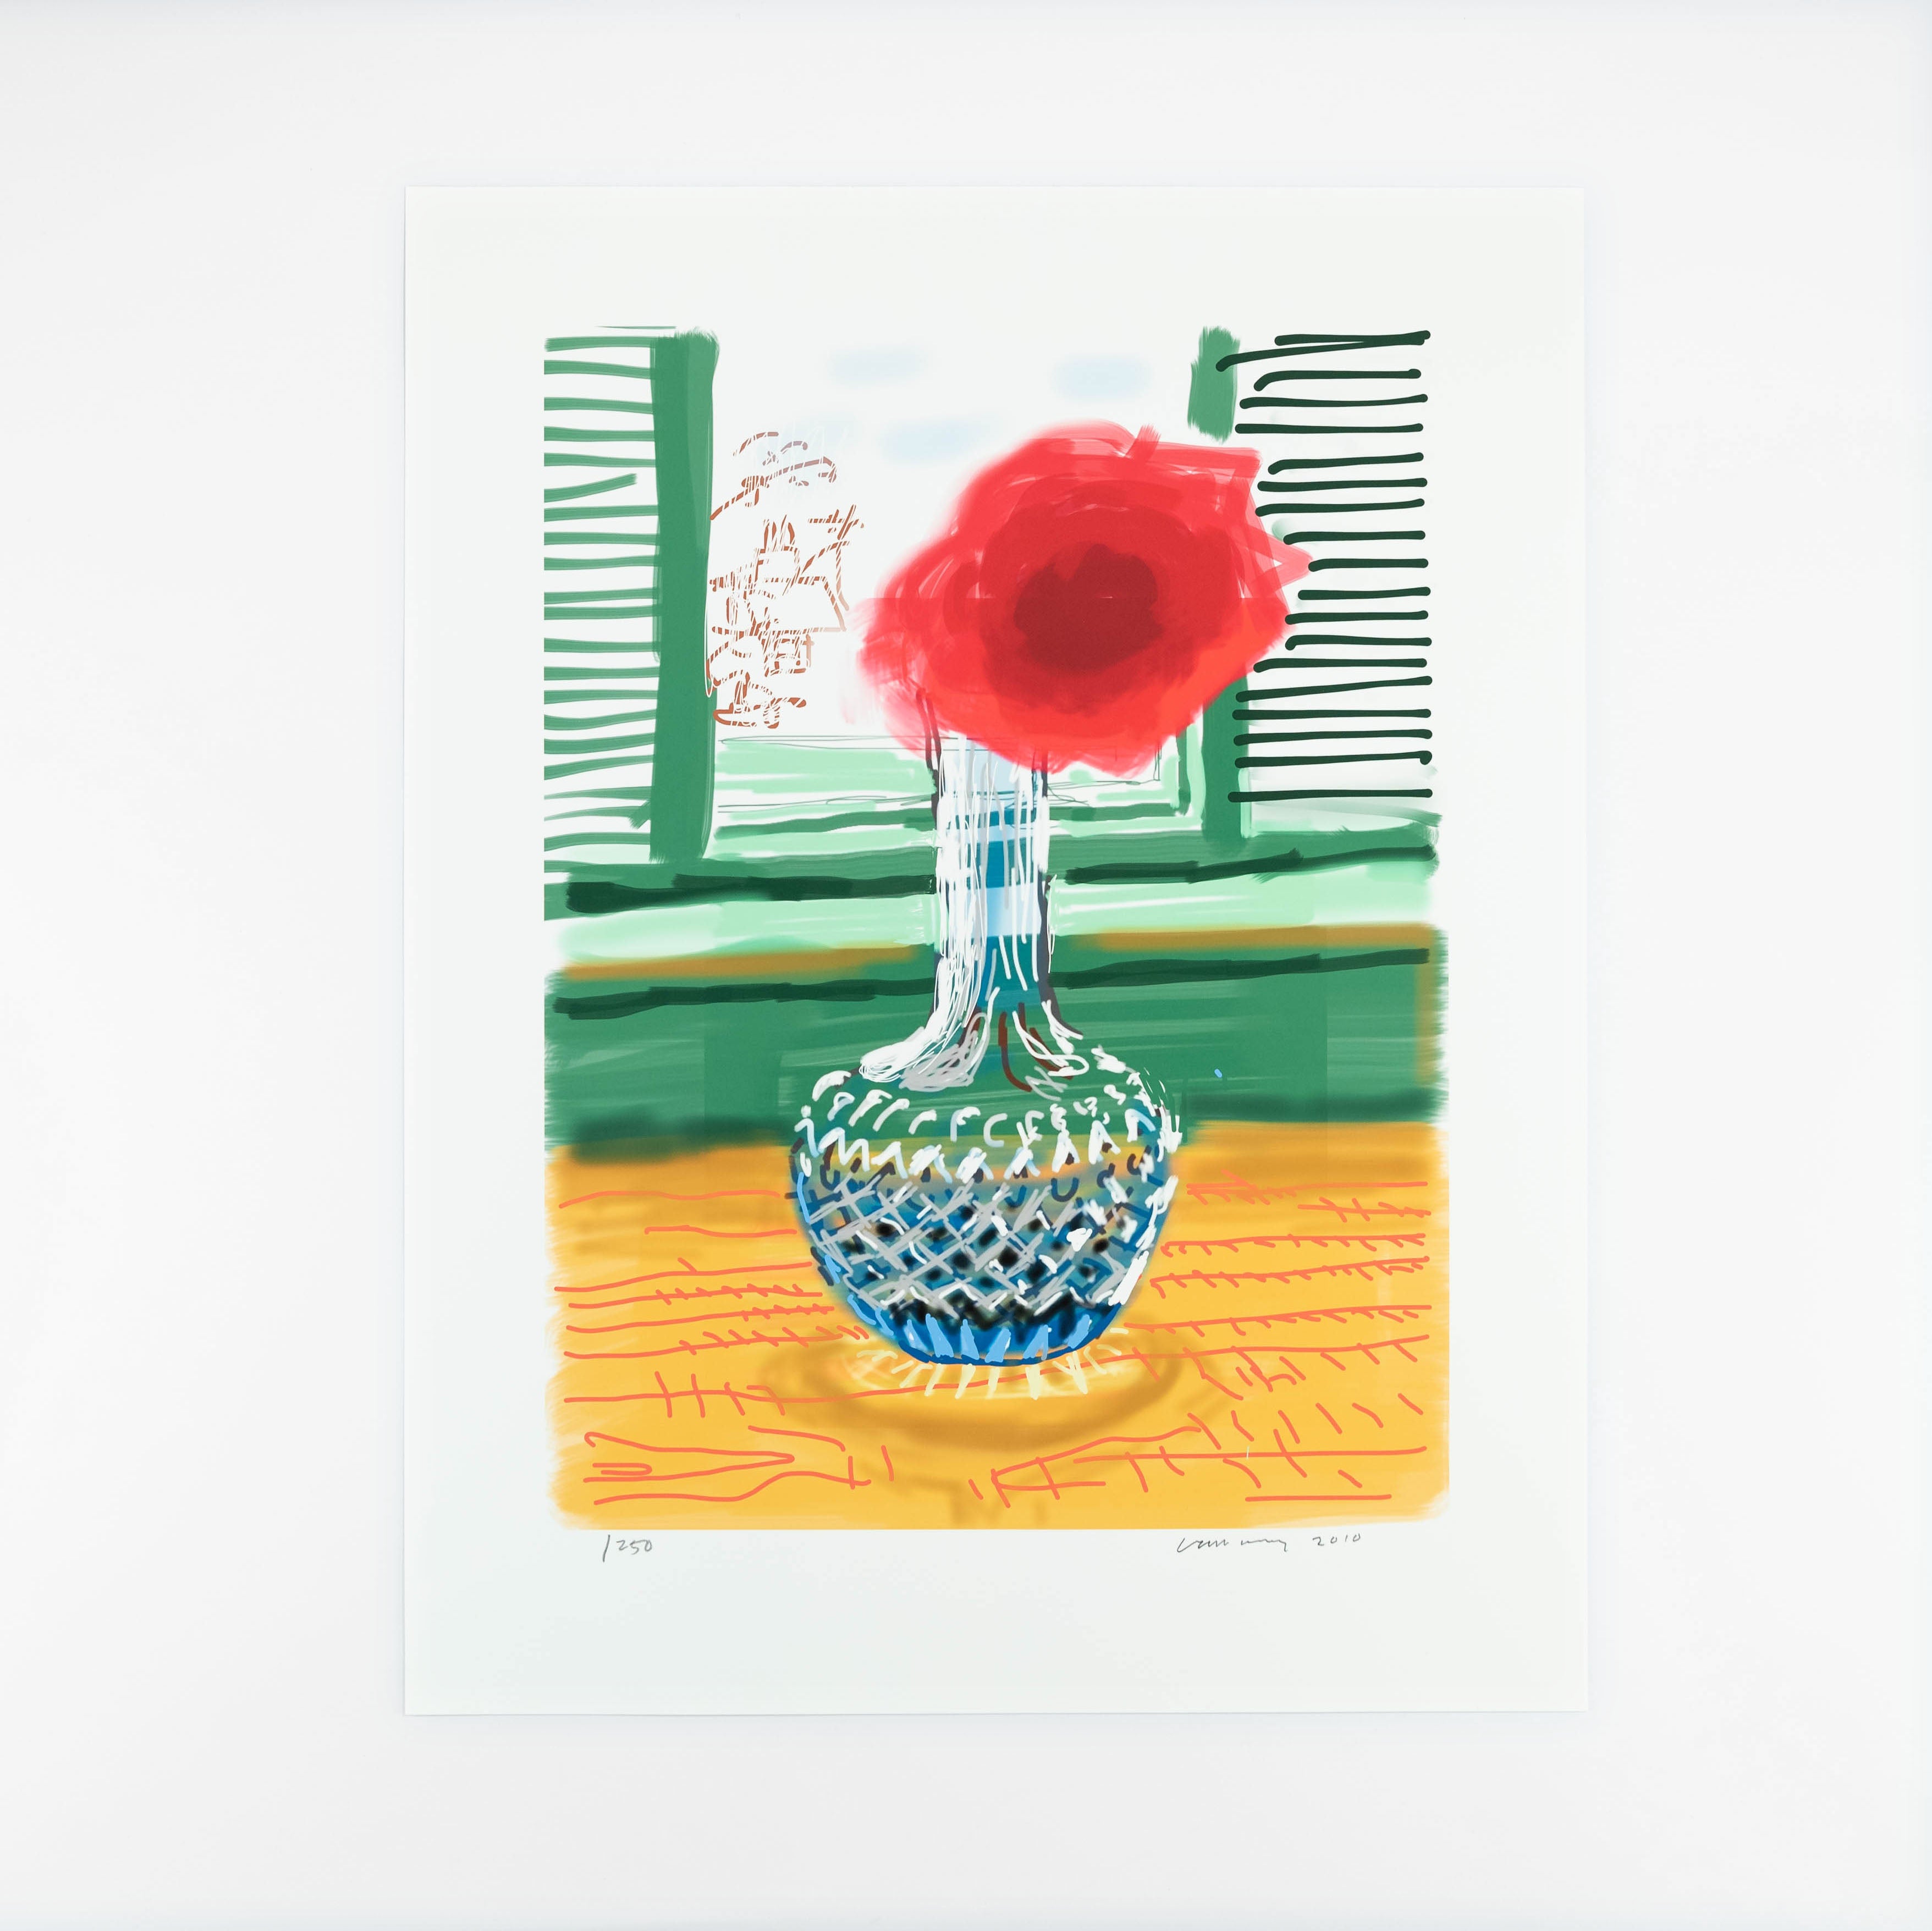 David Hockney, My Window. iPad drawing ‘No. 281’, 2019 For Sale | Lougher Contemporary 